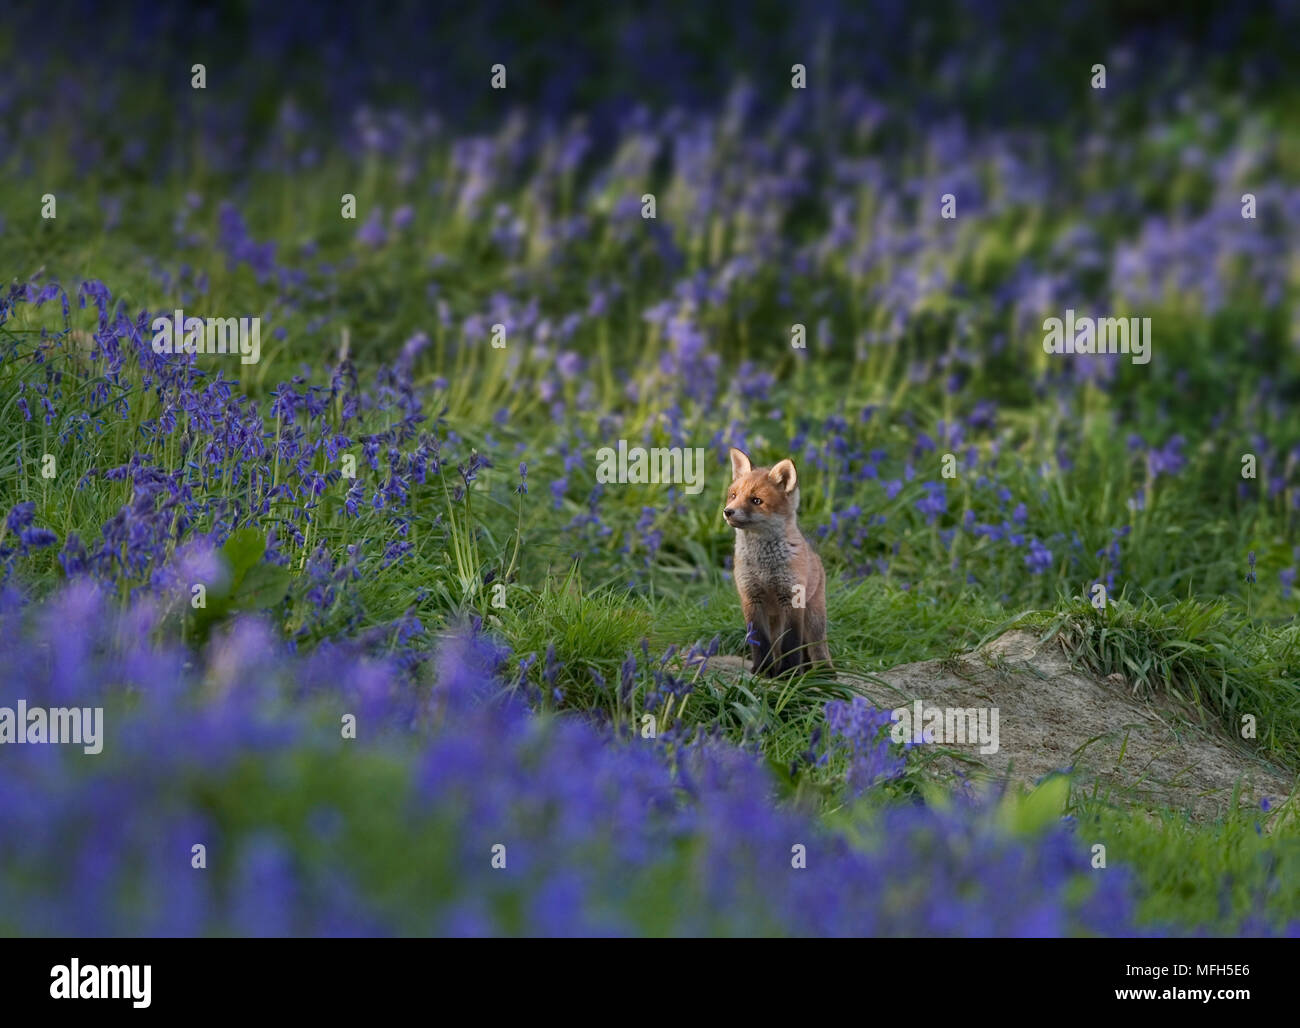 EUROPEAN RED FOX cub and bluebells Vulpes vulpes Sussex, UK Stock Photo